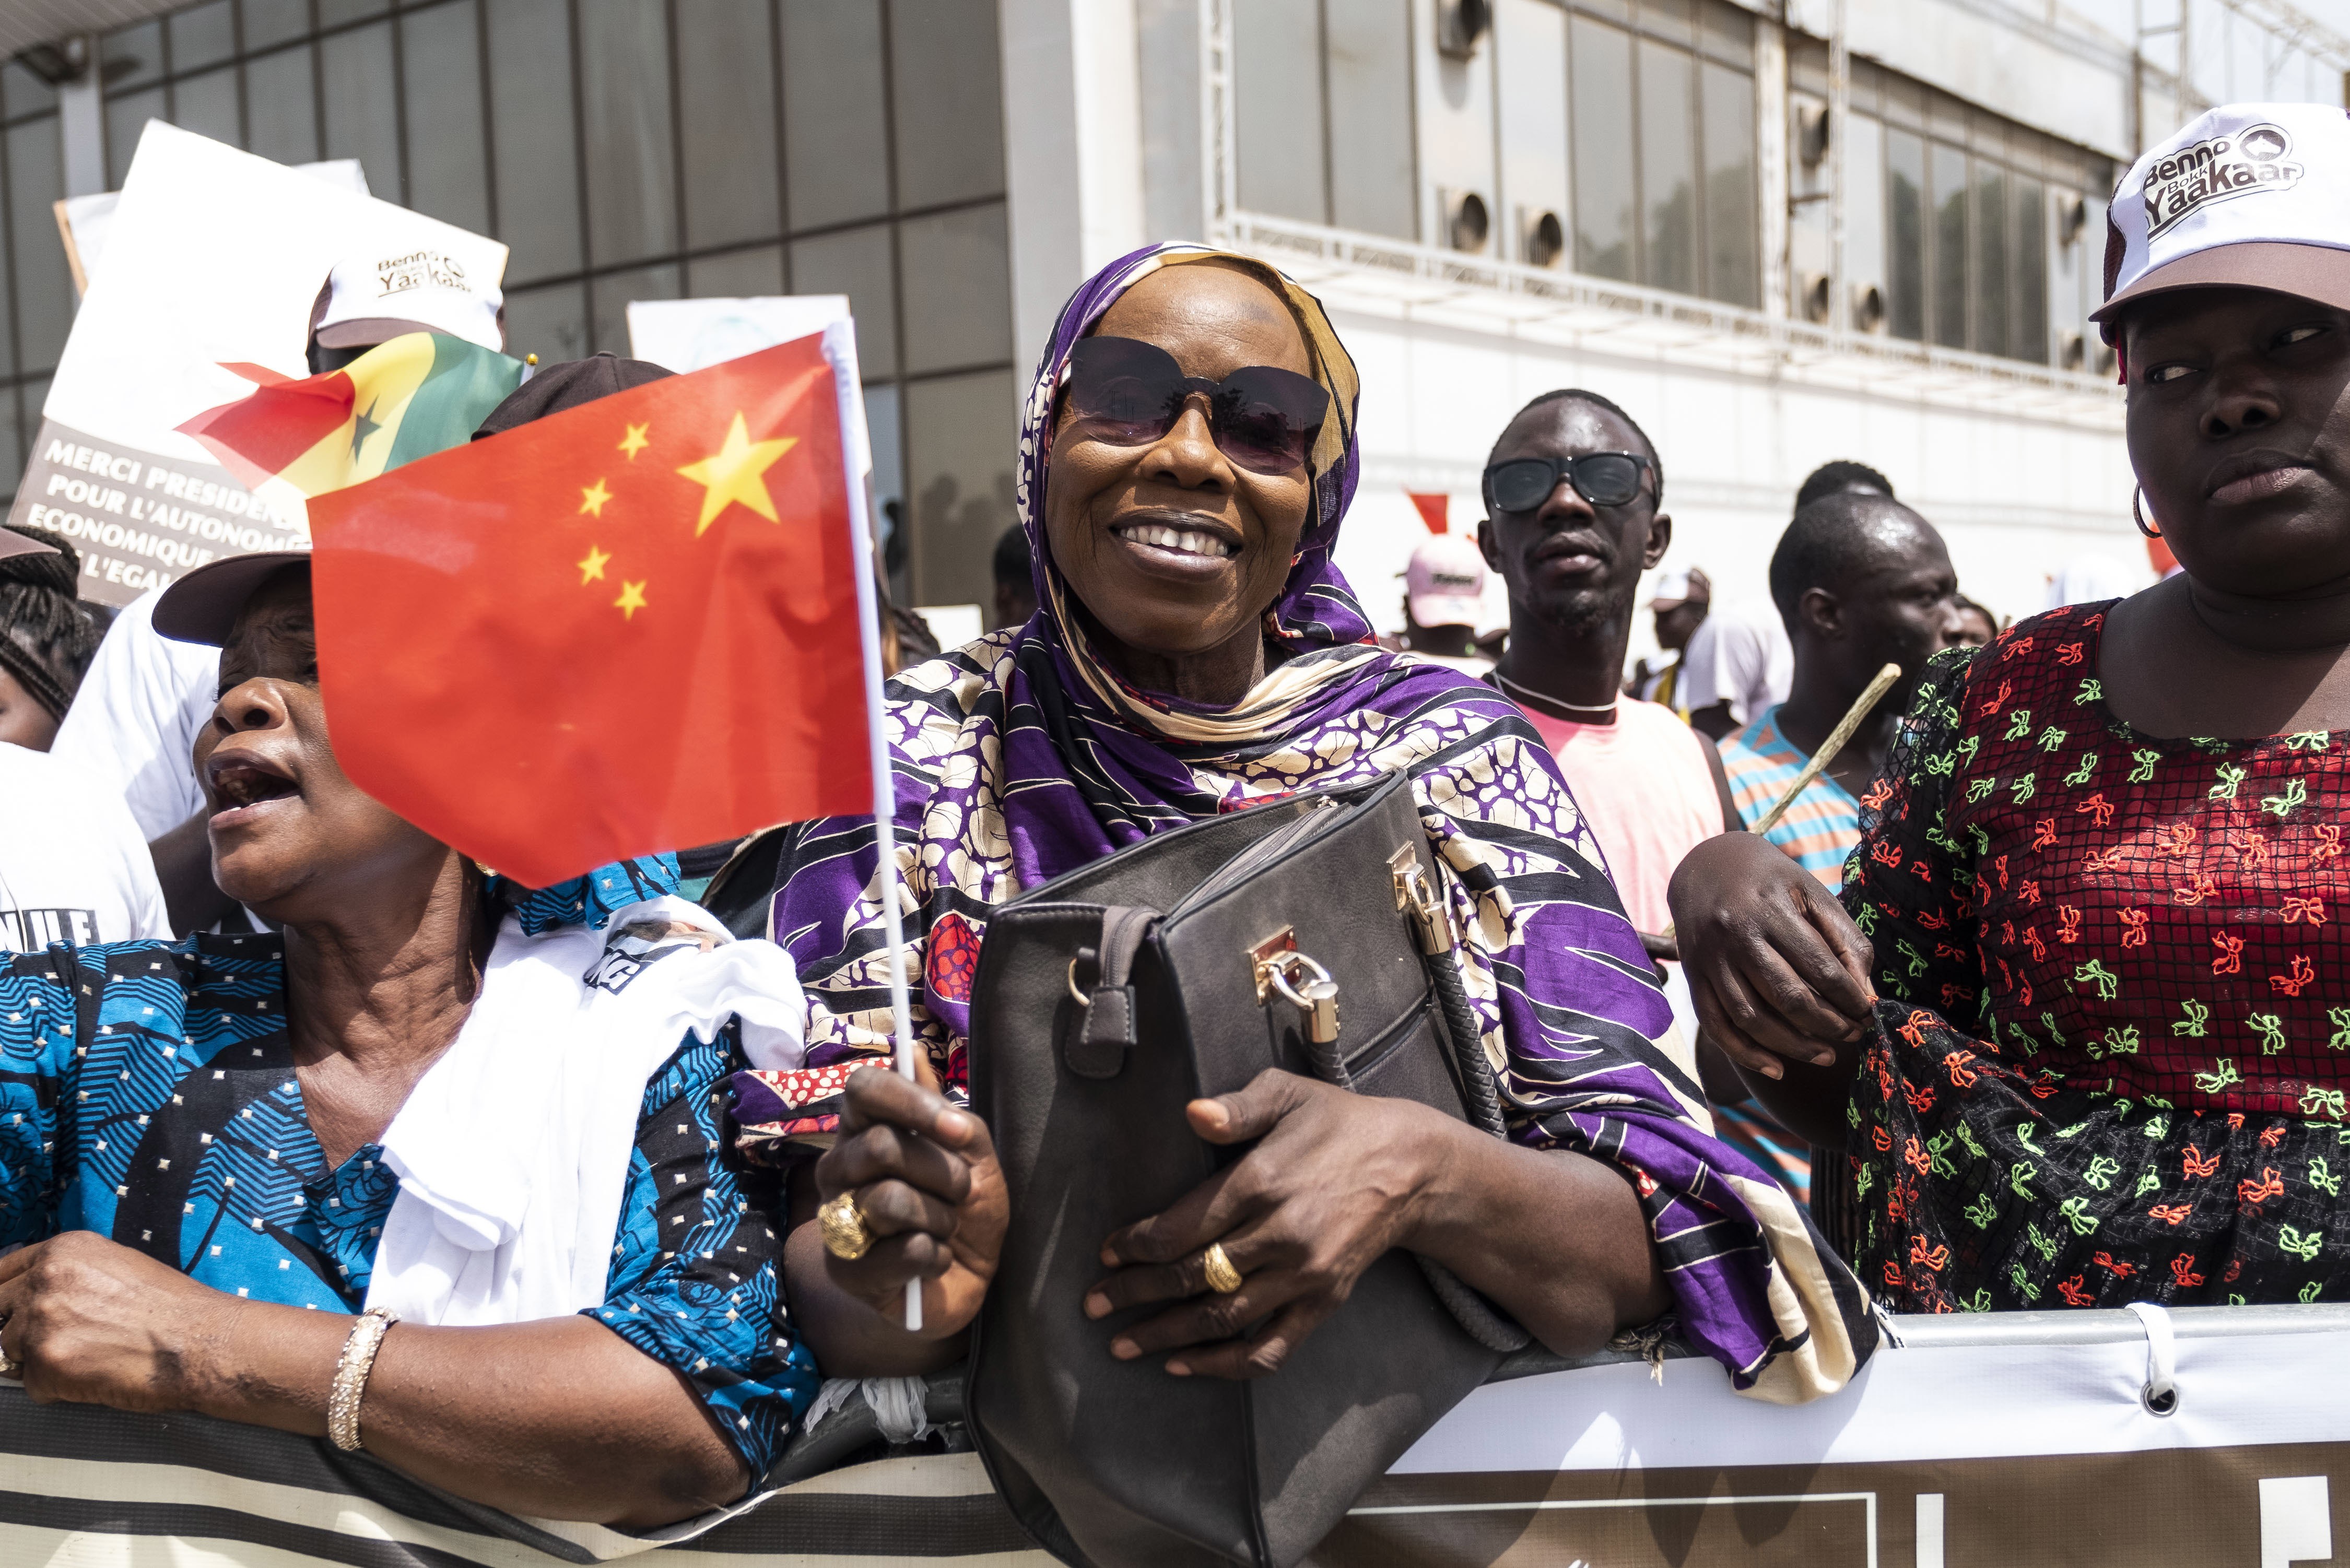 A woman welcomes Chinese President Xi Jinping to Dakar, Senegal, on July 21, 2018. Xi was on a four-nation visit to Africa seeking deeper military and economic ties. Photo: AP